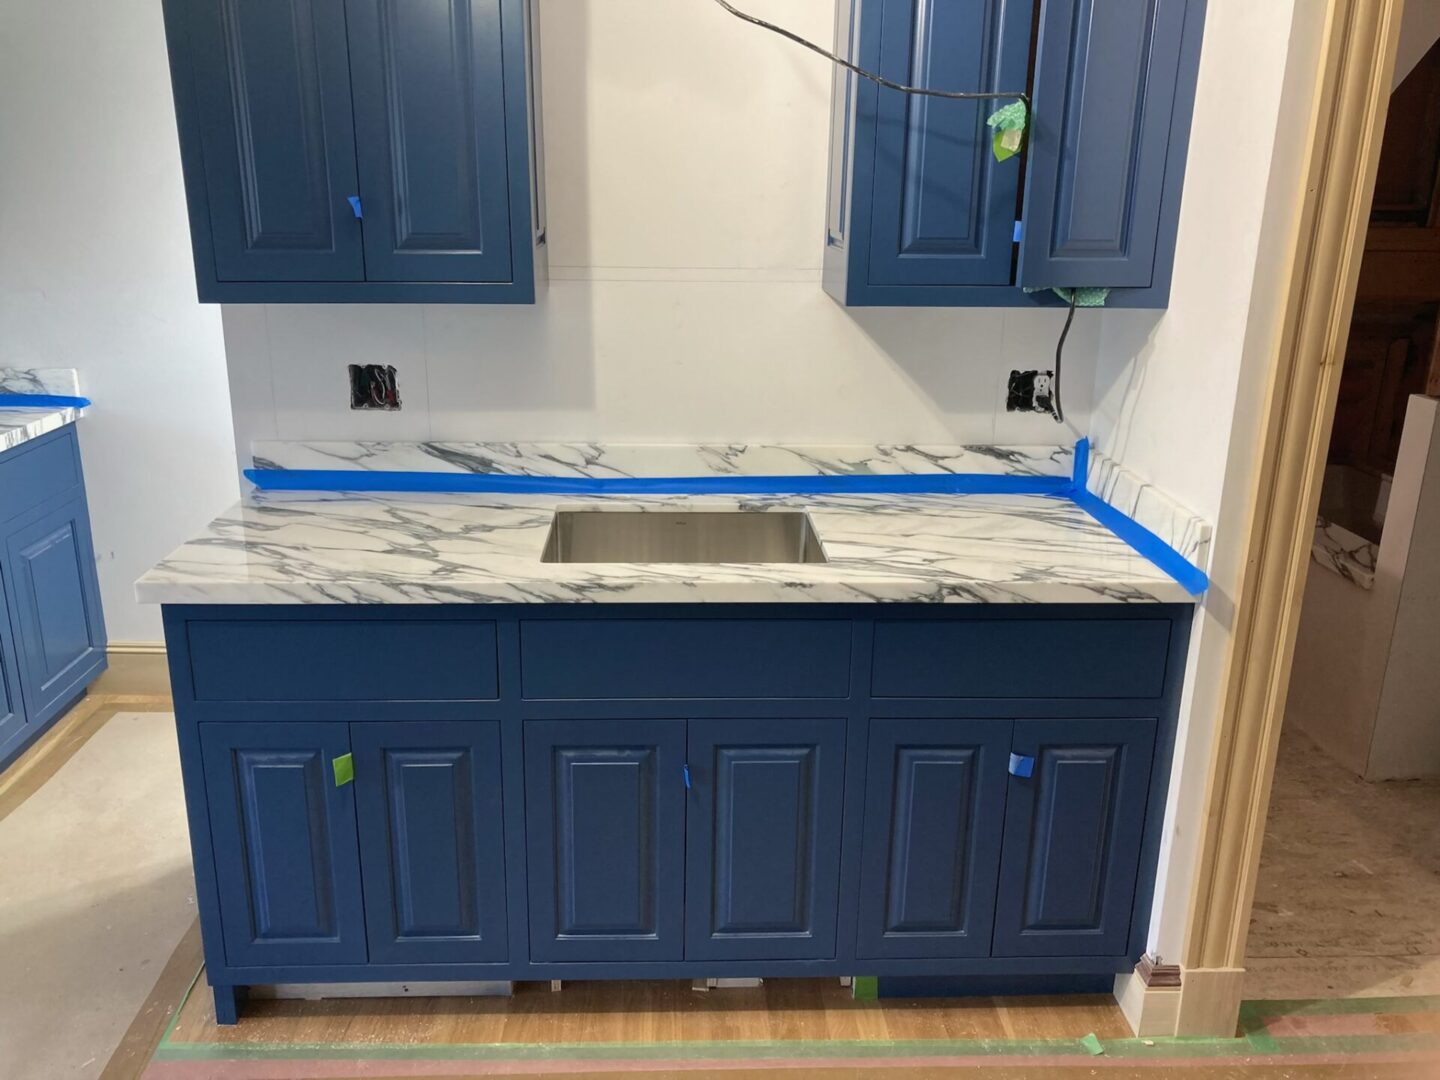 Unfinished view of the wash area with blue cabinet